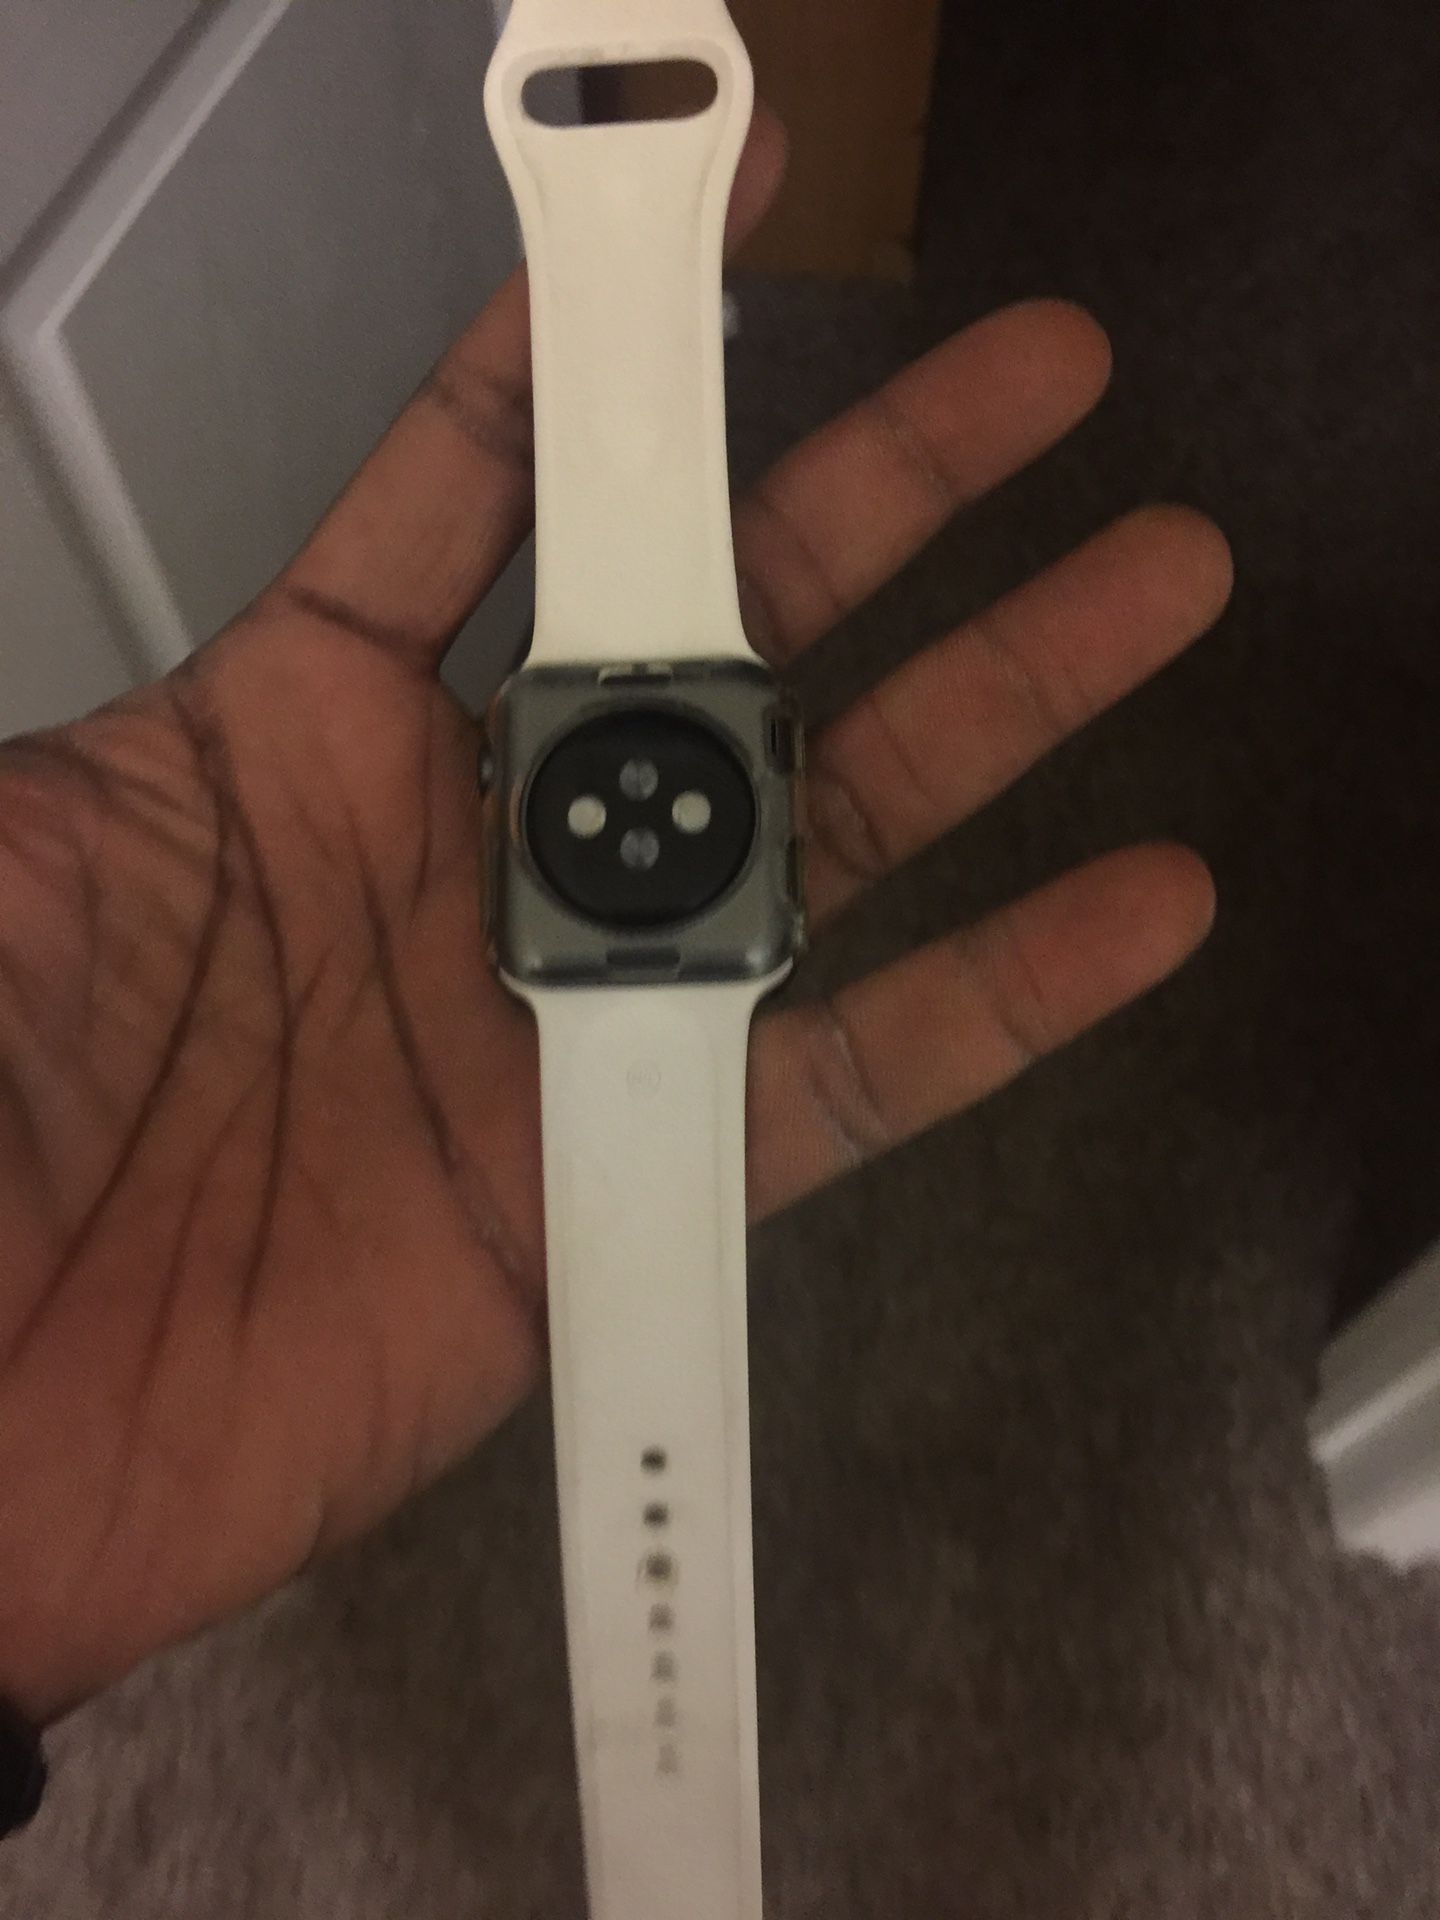 Apple Watch series 1 box and charger included